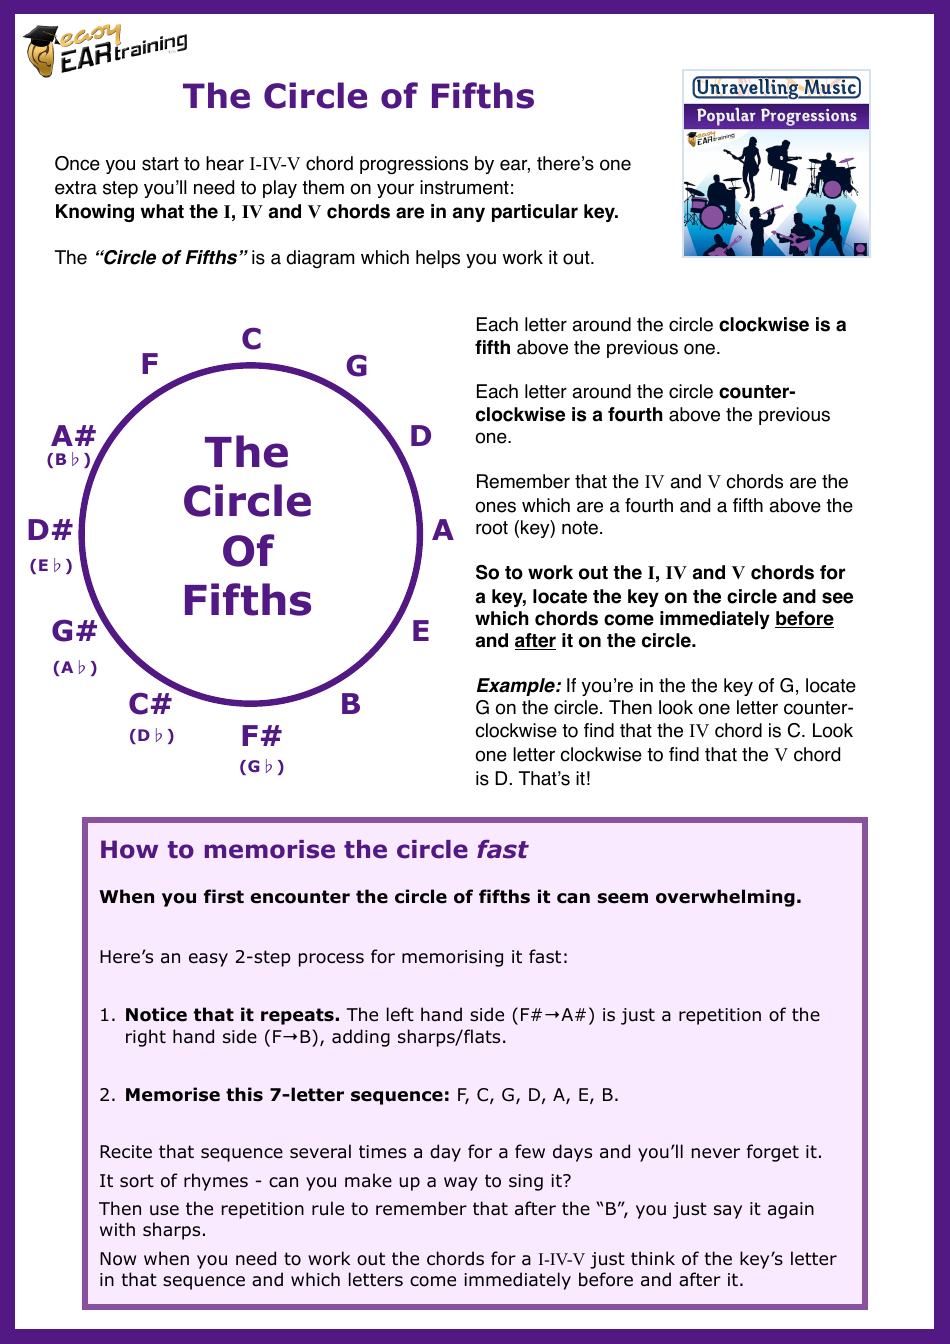 The Circle of Fifths Cheat Sheet